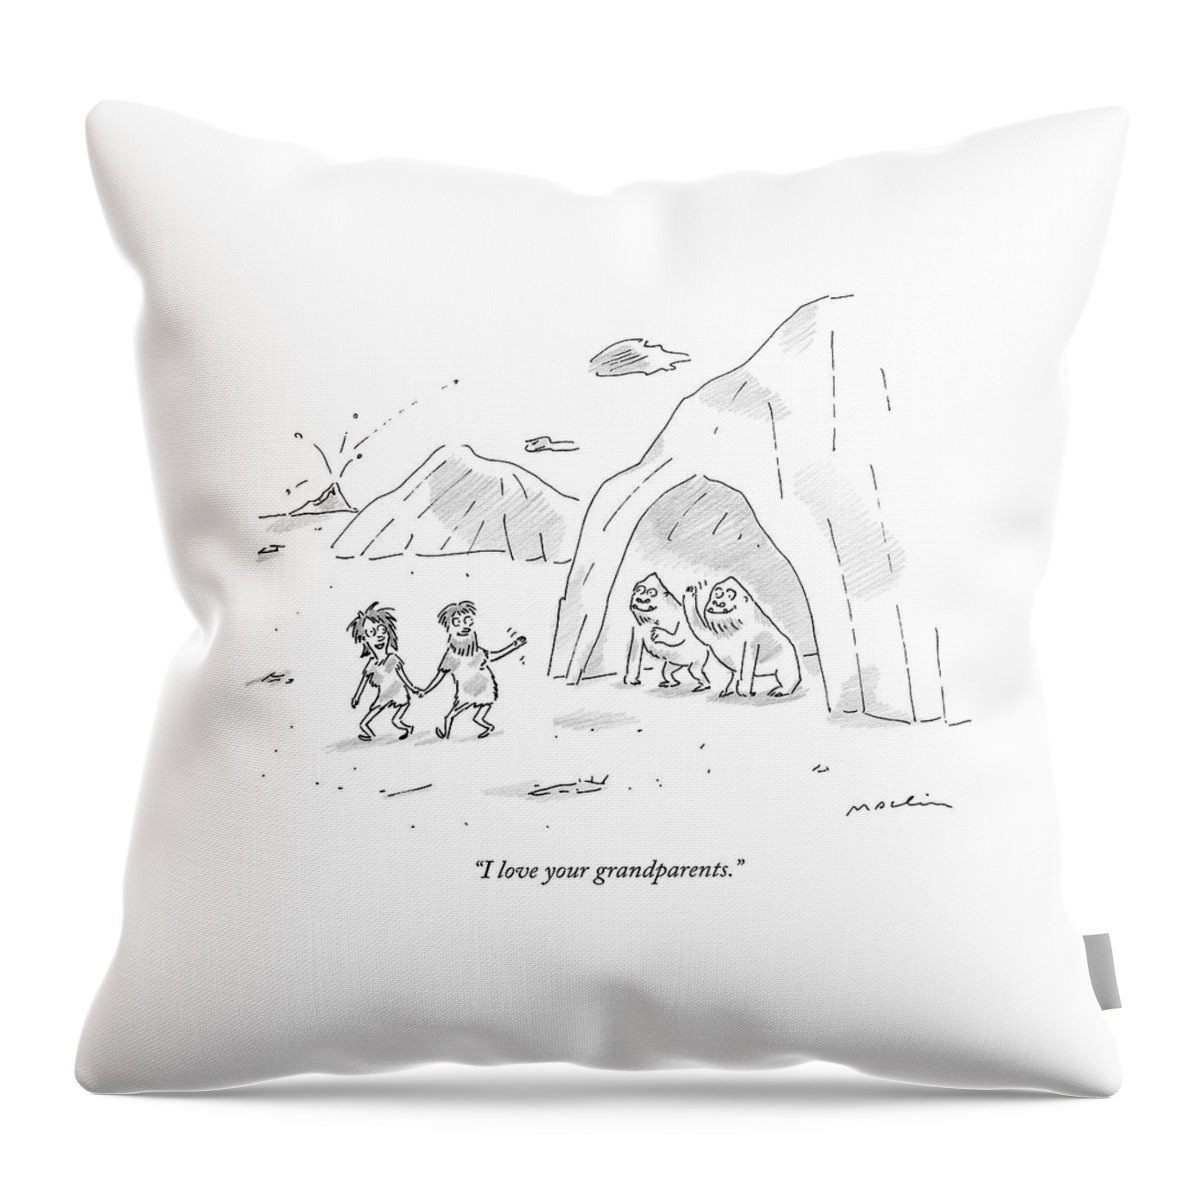 I Love Your Grandparents Throw Pillow